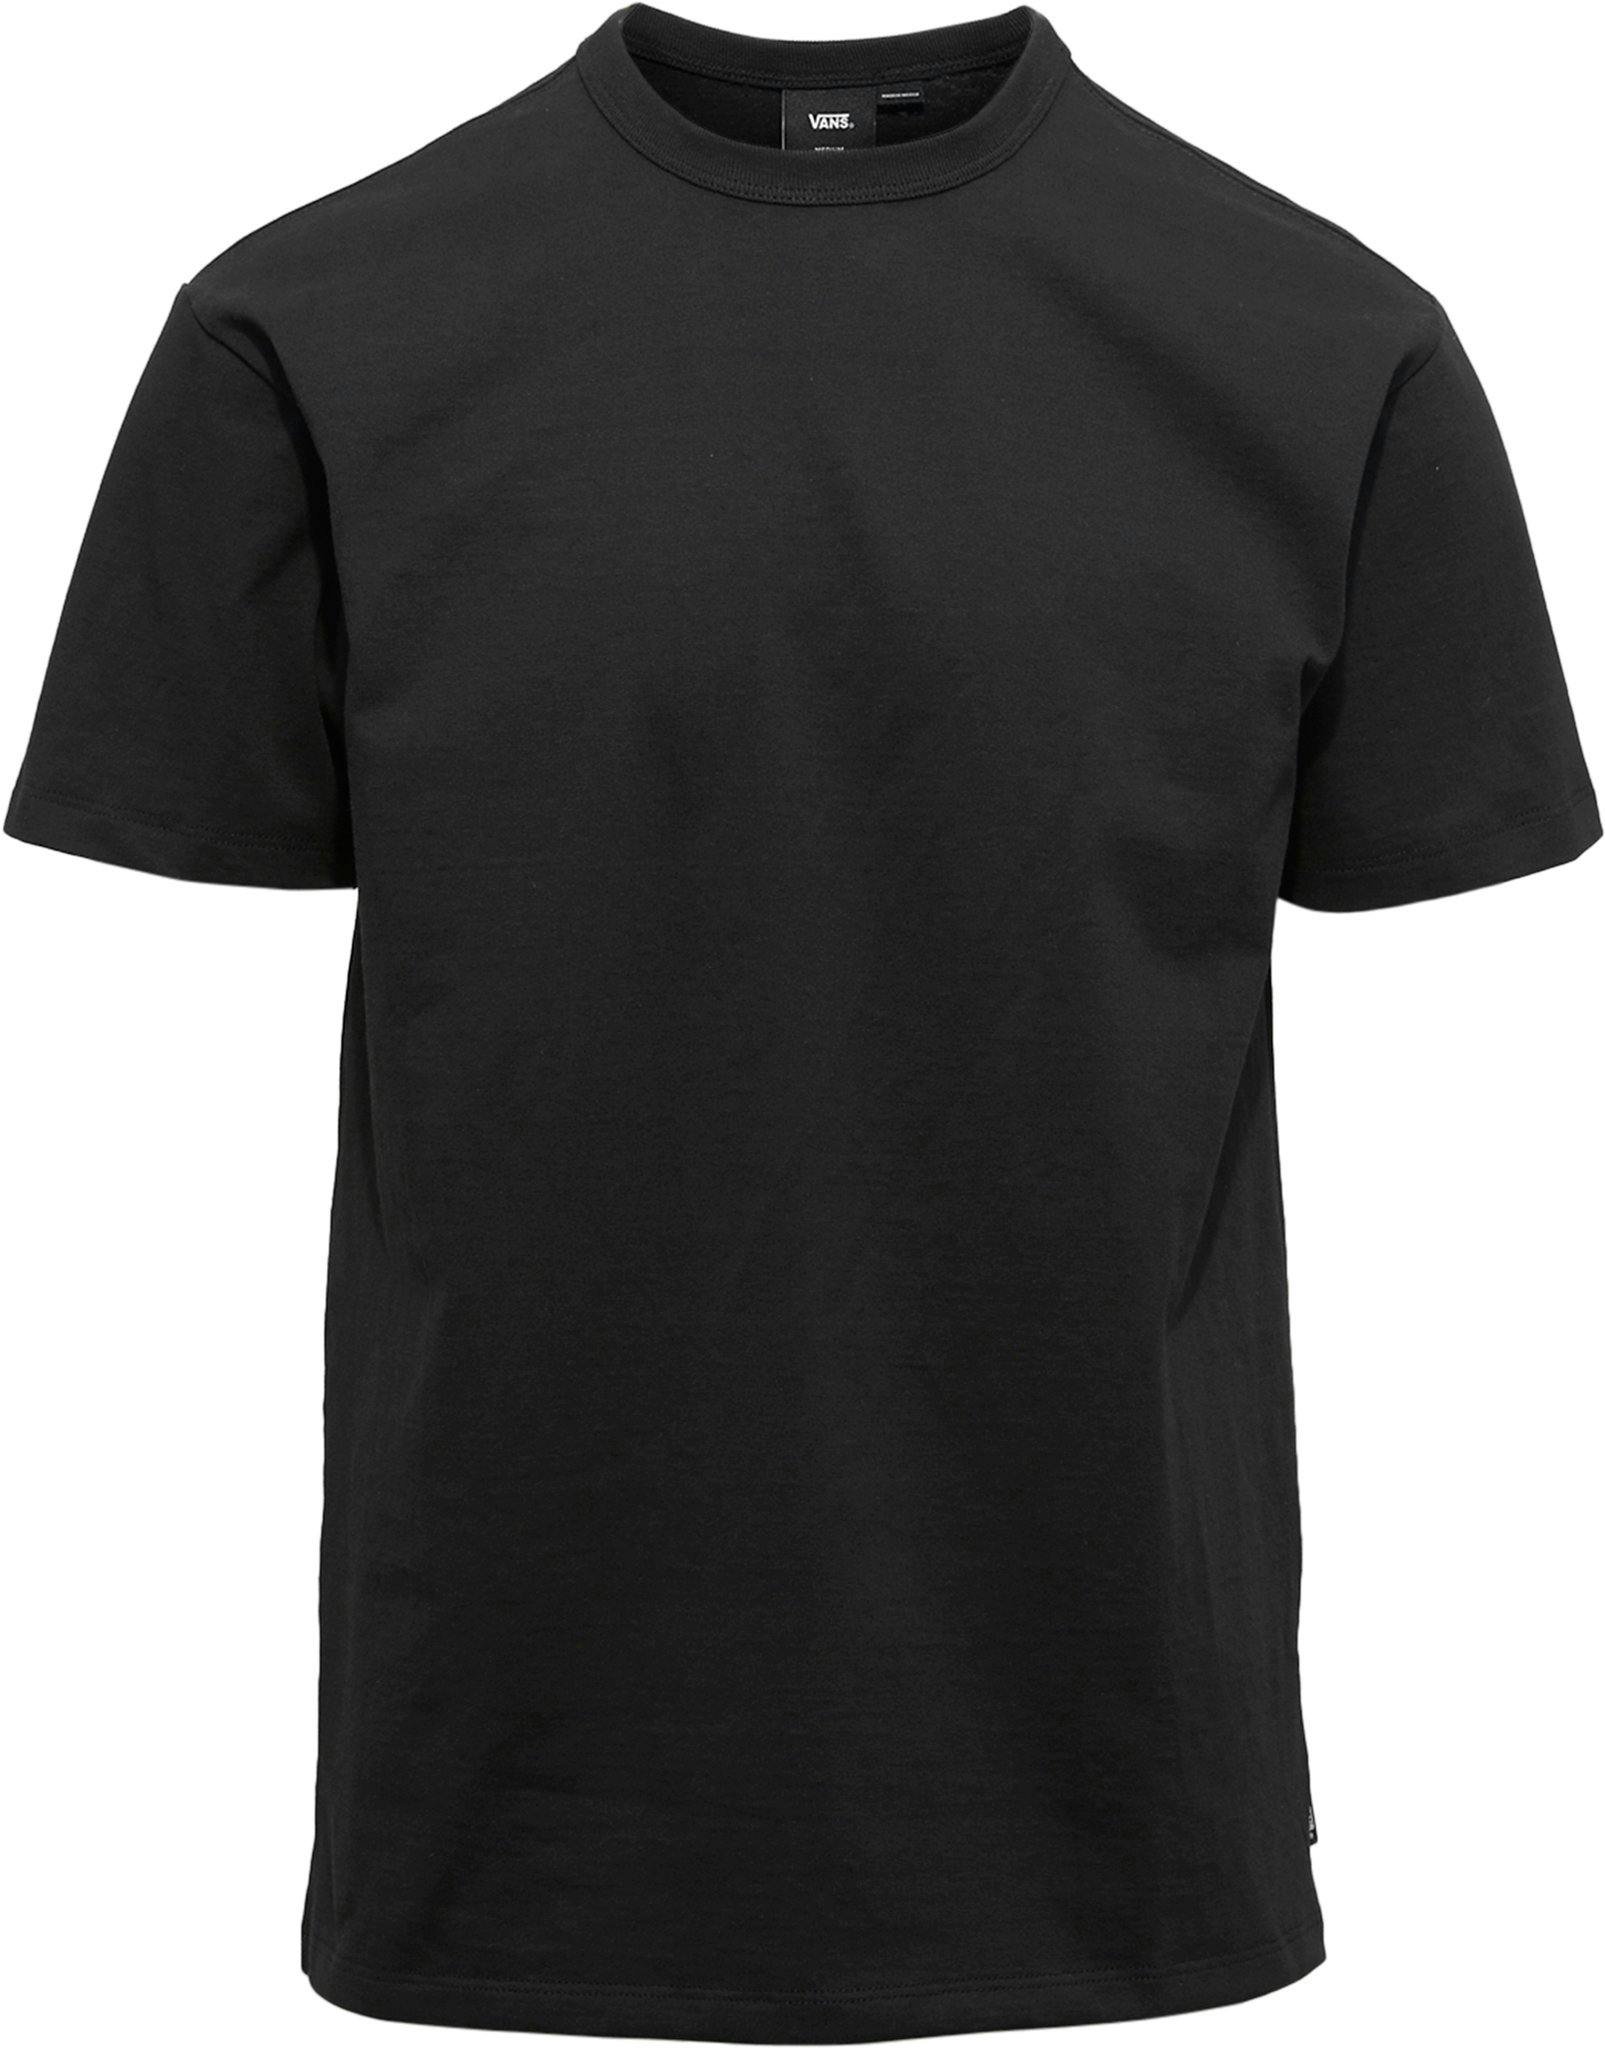 Product image for Off The Wall II Short Sleeve T-shirt - Men's